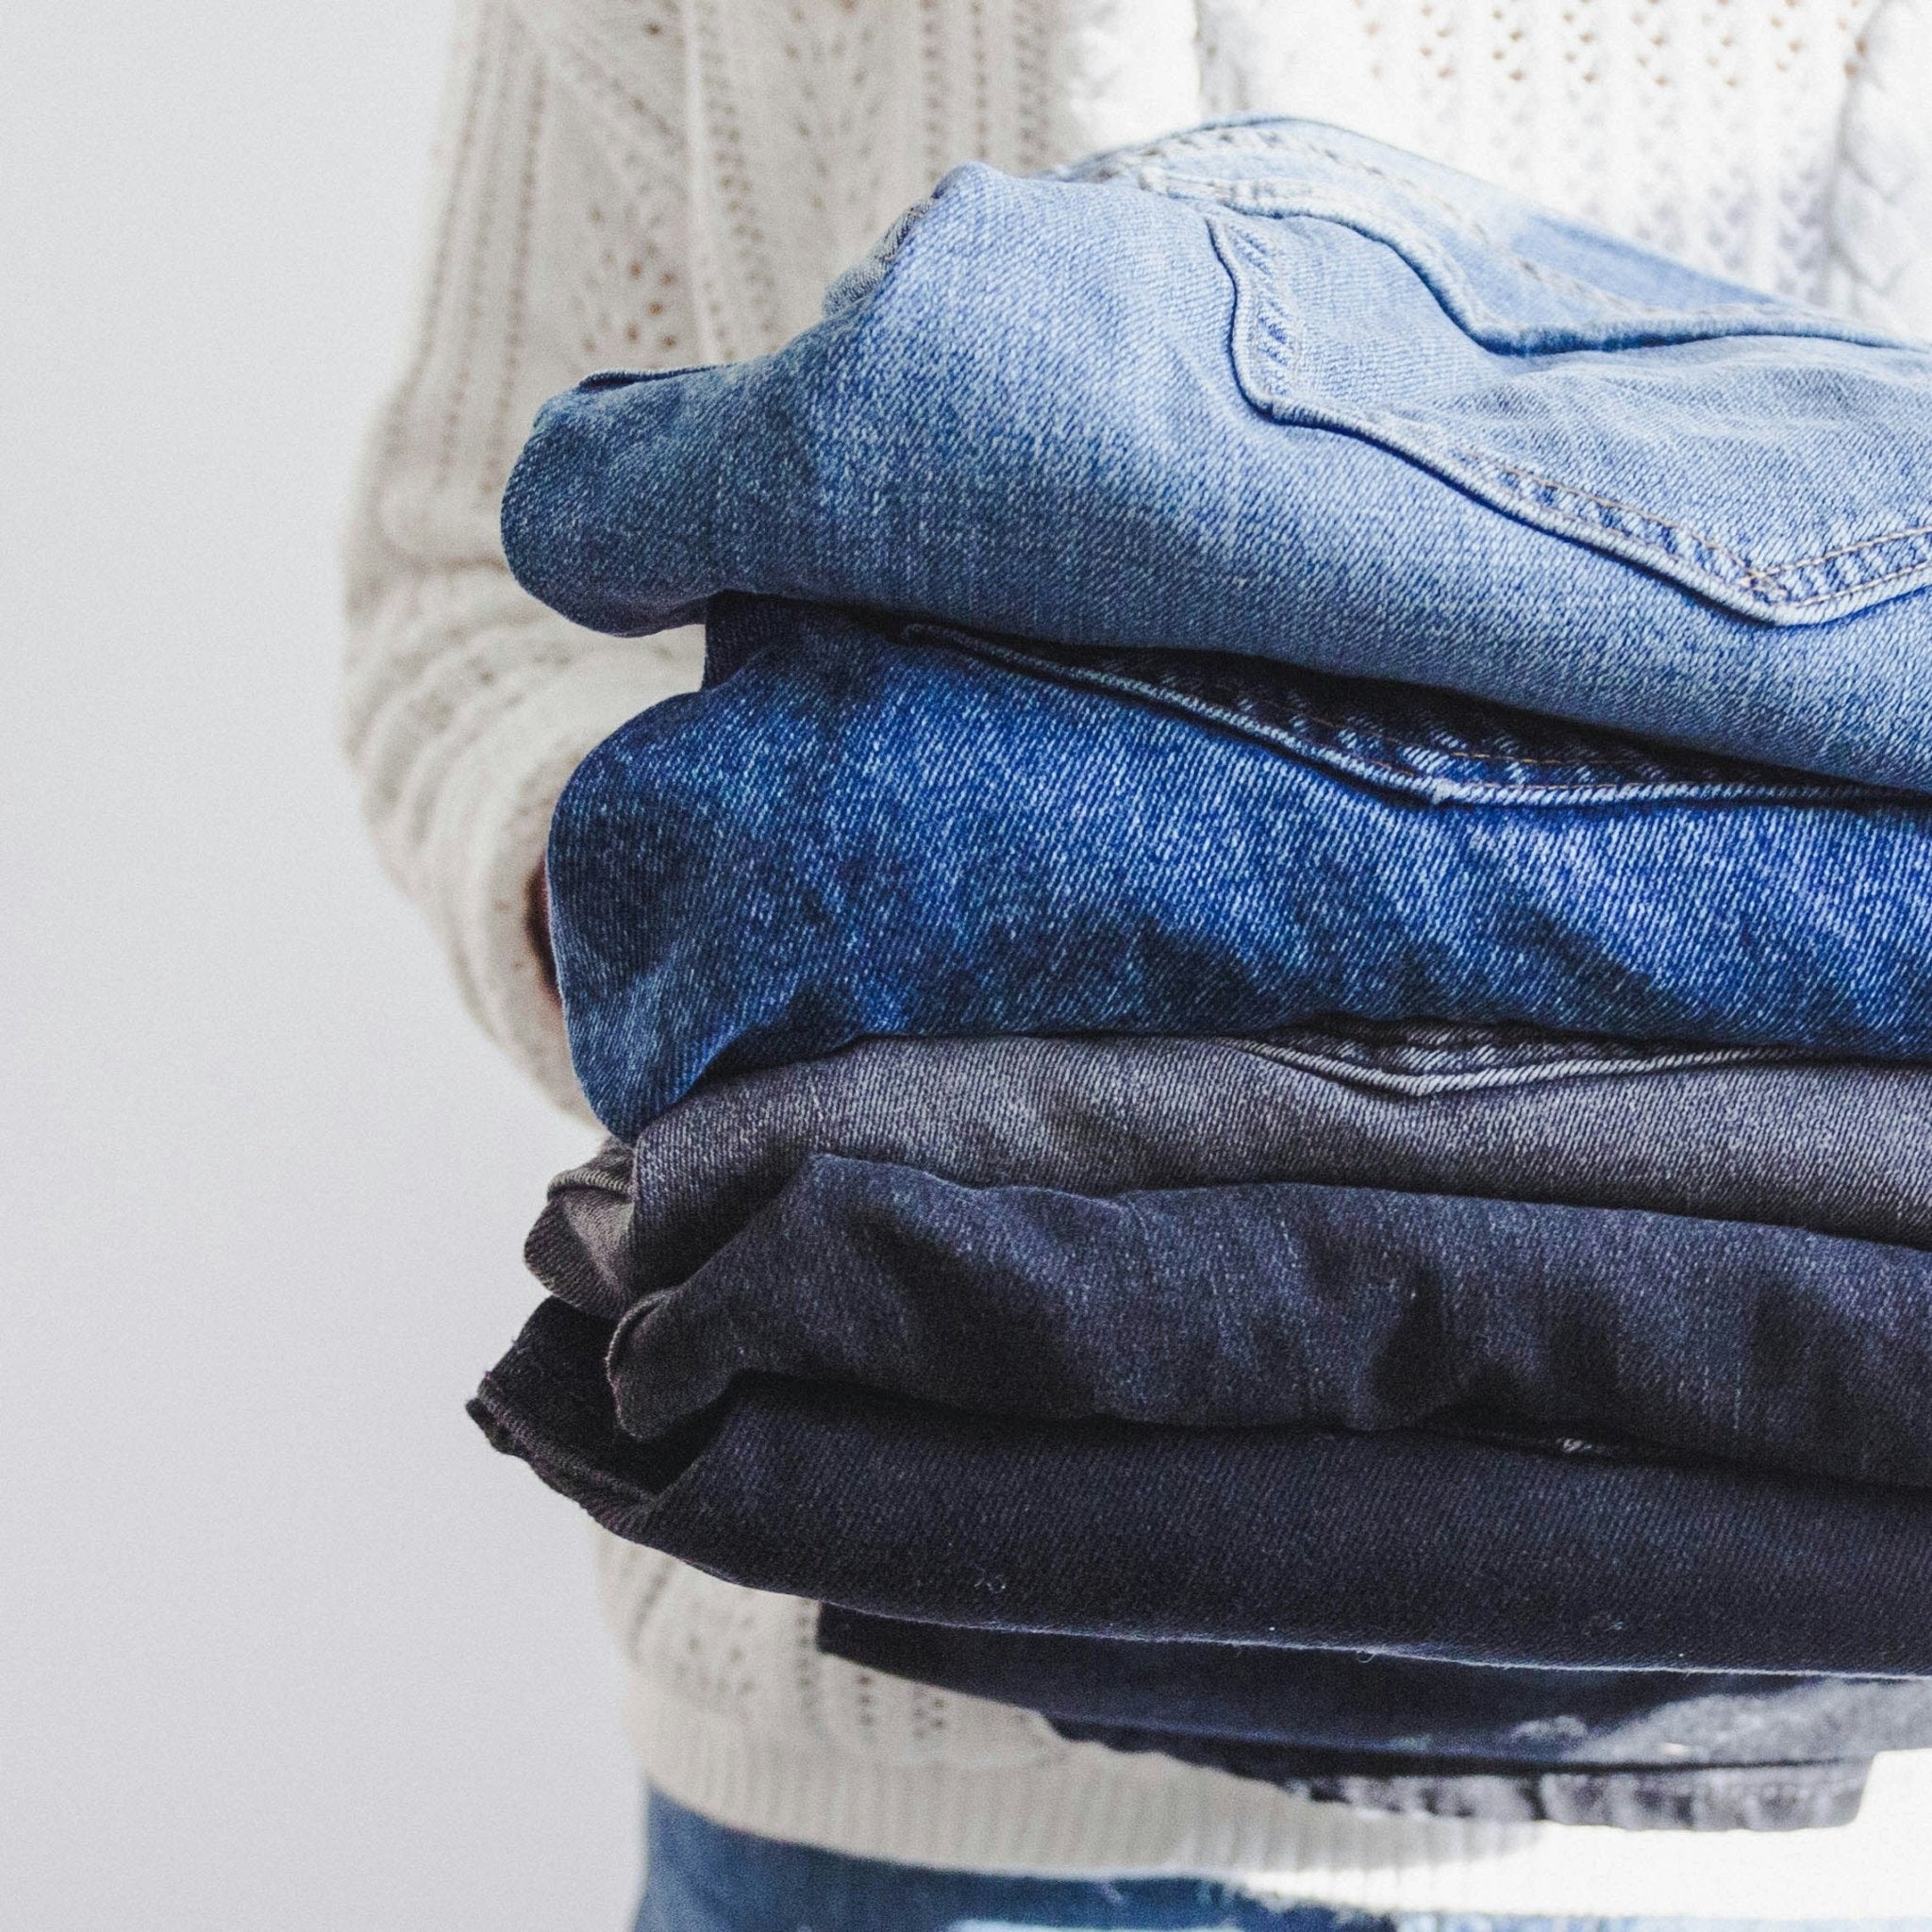 How To Find The Perfect Jeans - The Bank